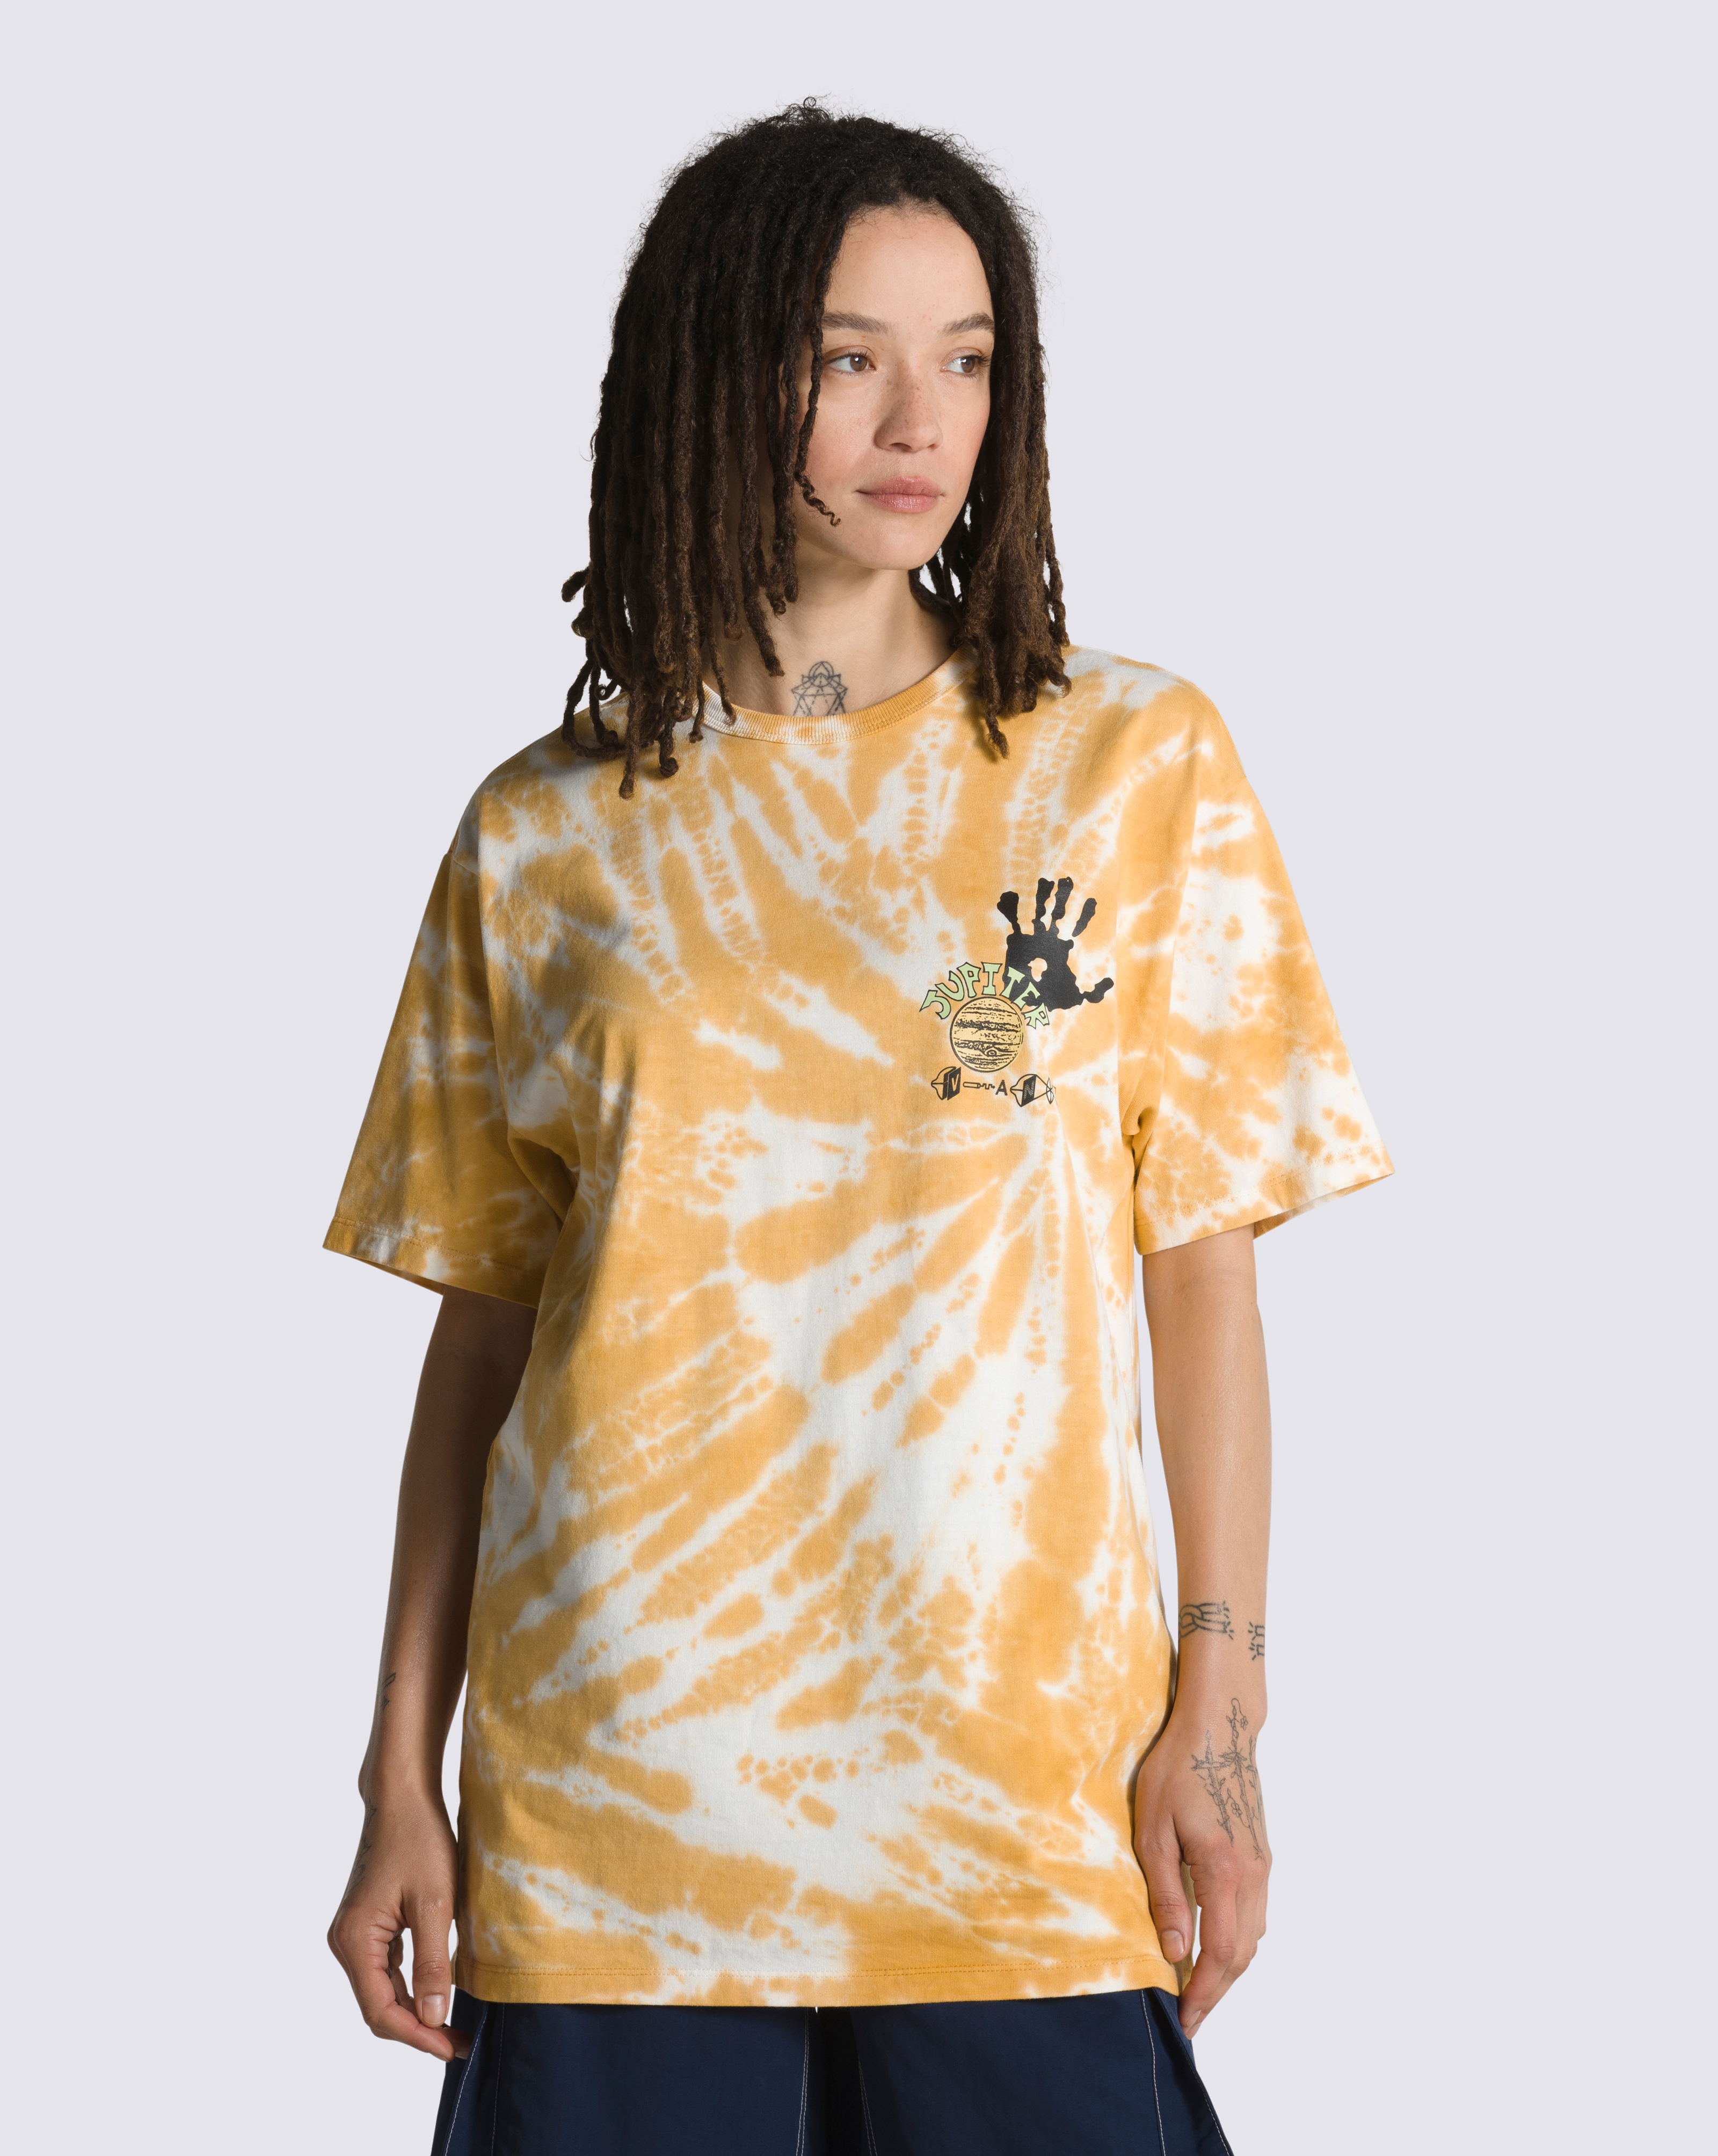 Polo OFF THE WALL TIE-DYE X ZION WRIGHT